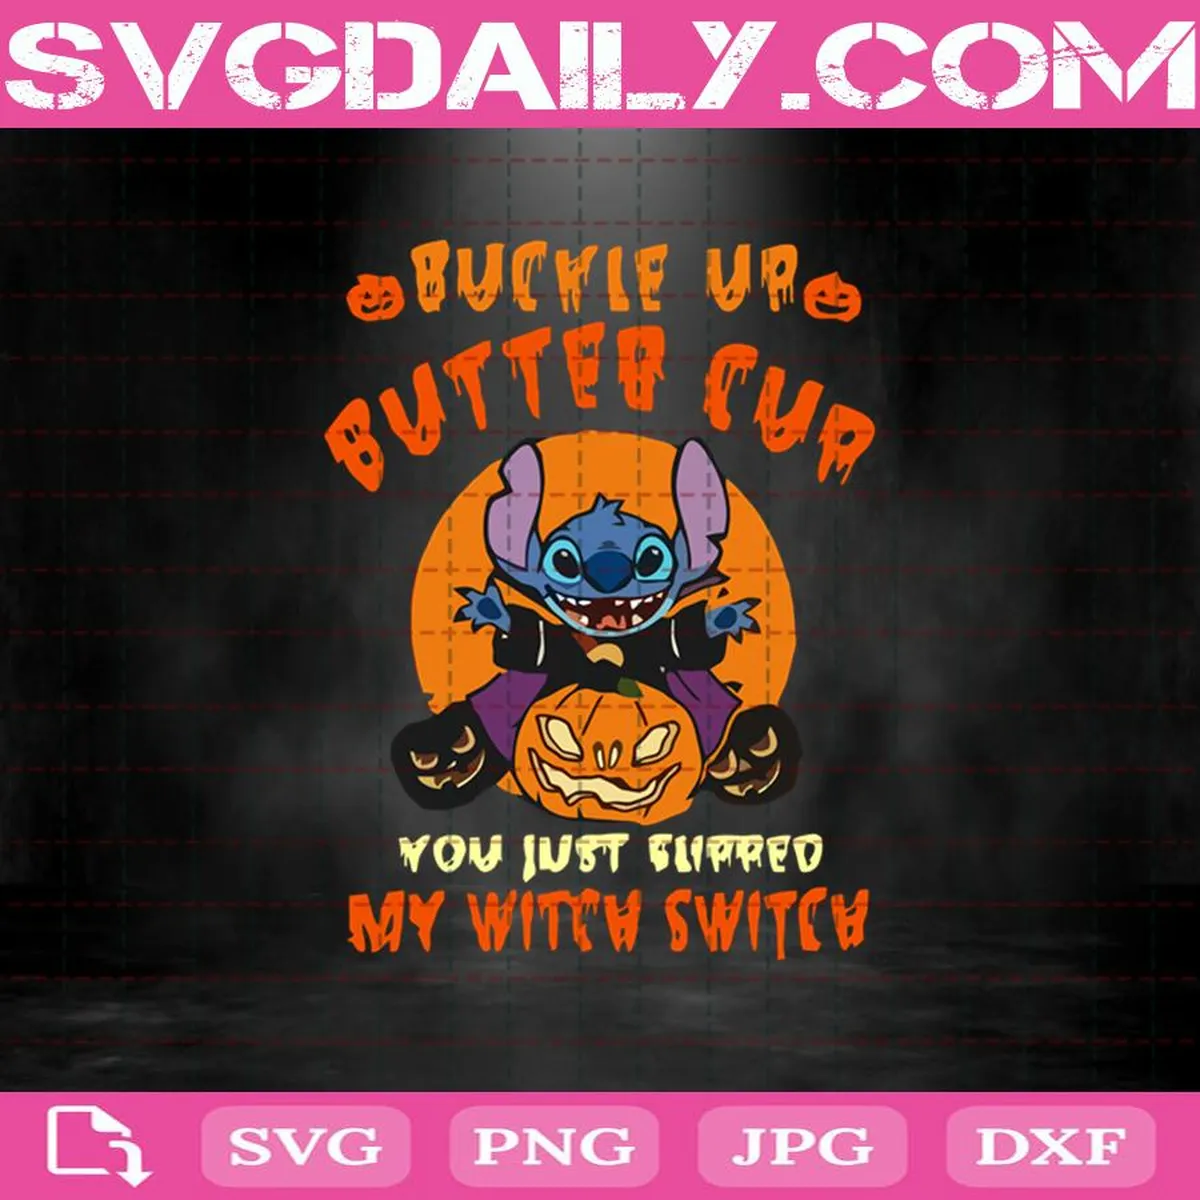 Buckle Up Butter Cup You Just Flipped My Witch Switch Svg, Stitch Svg, Halloween Svg, Pumpkin Svg, Stitch Pumpkin Svg, Witch Svg